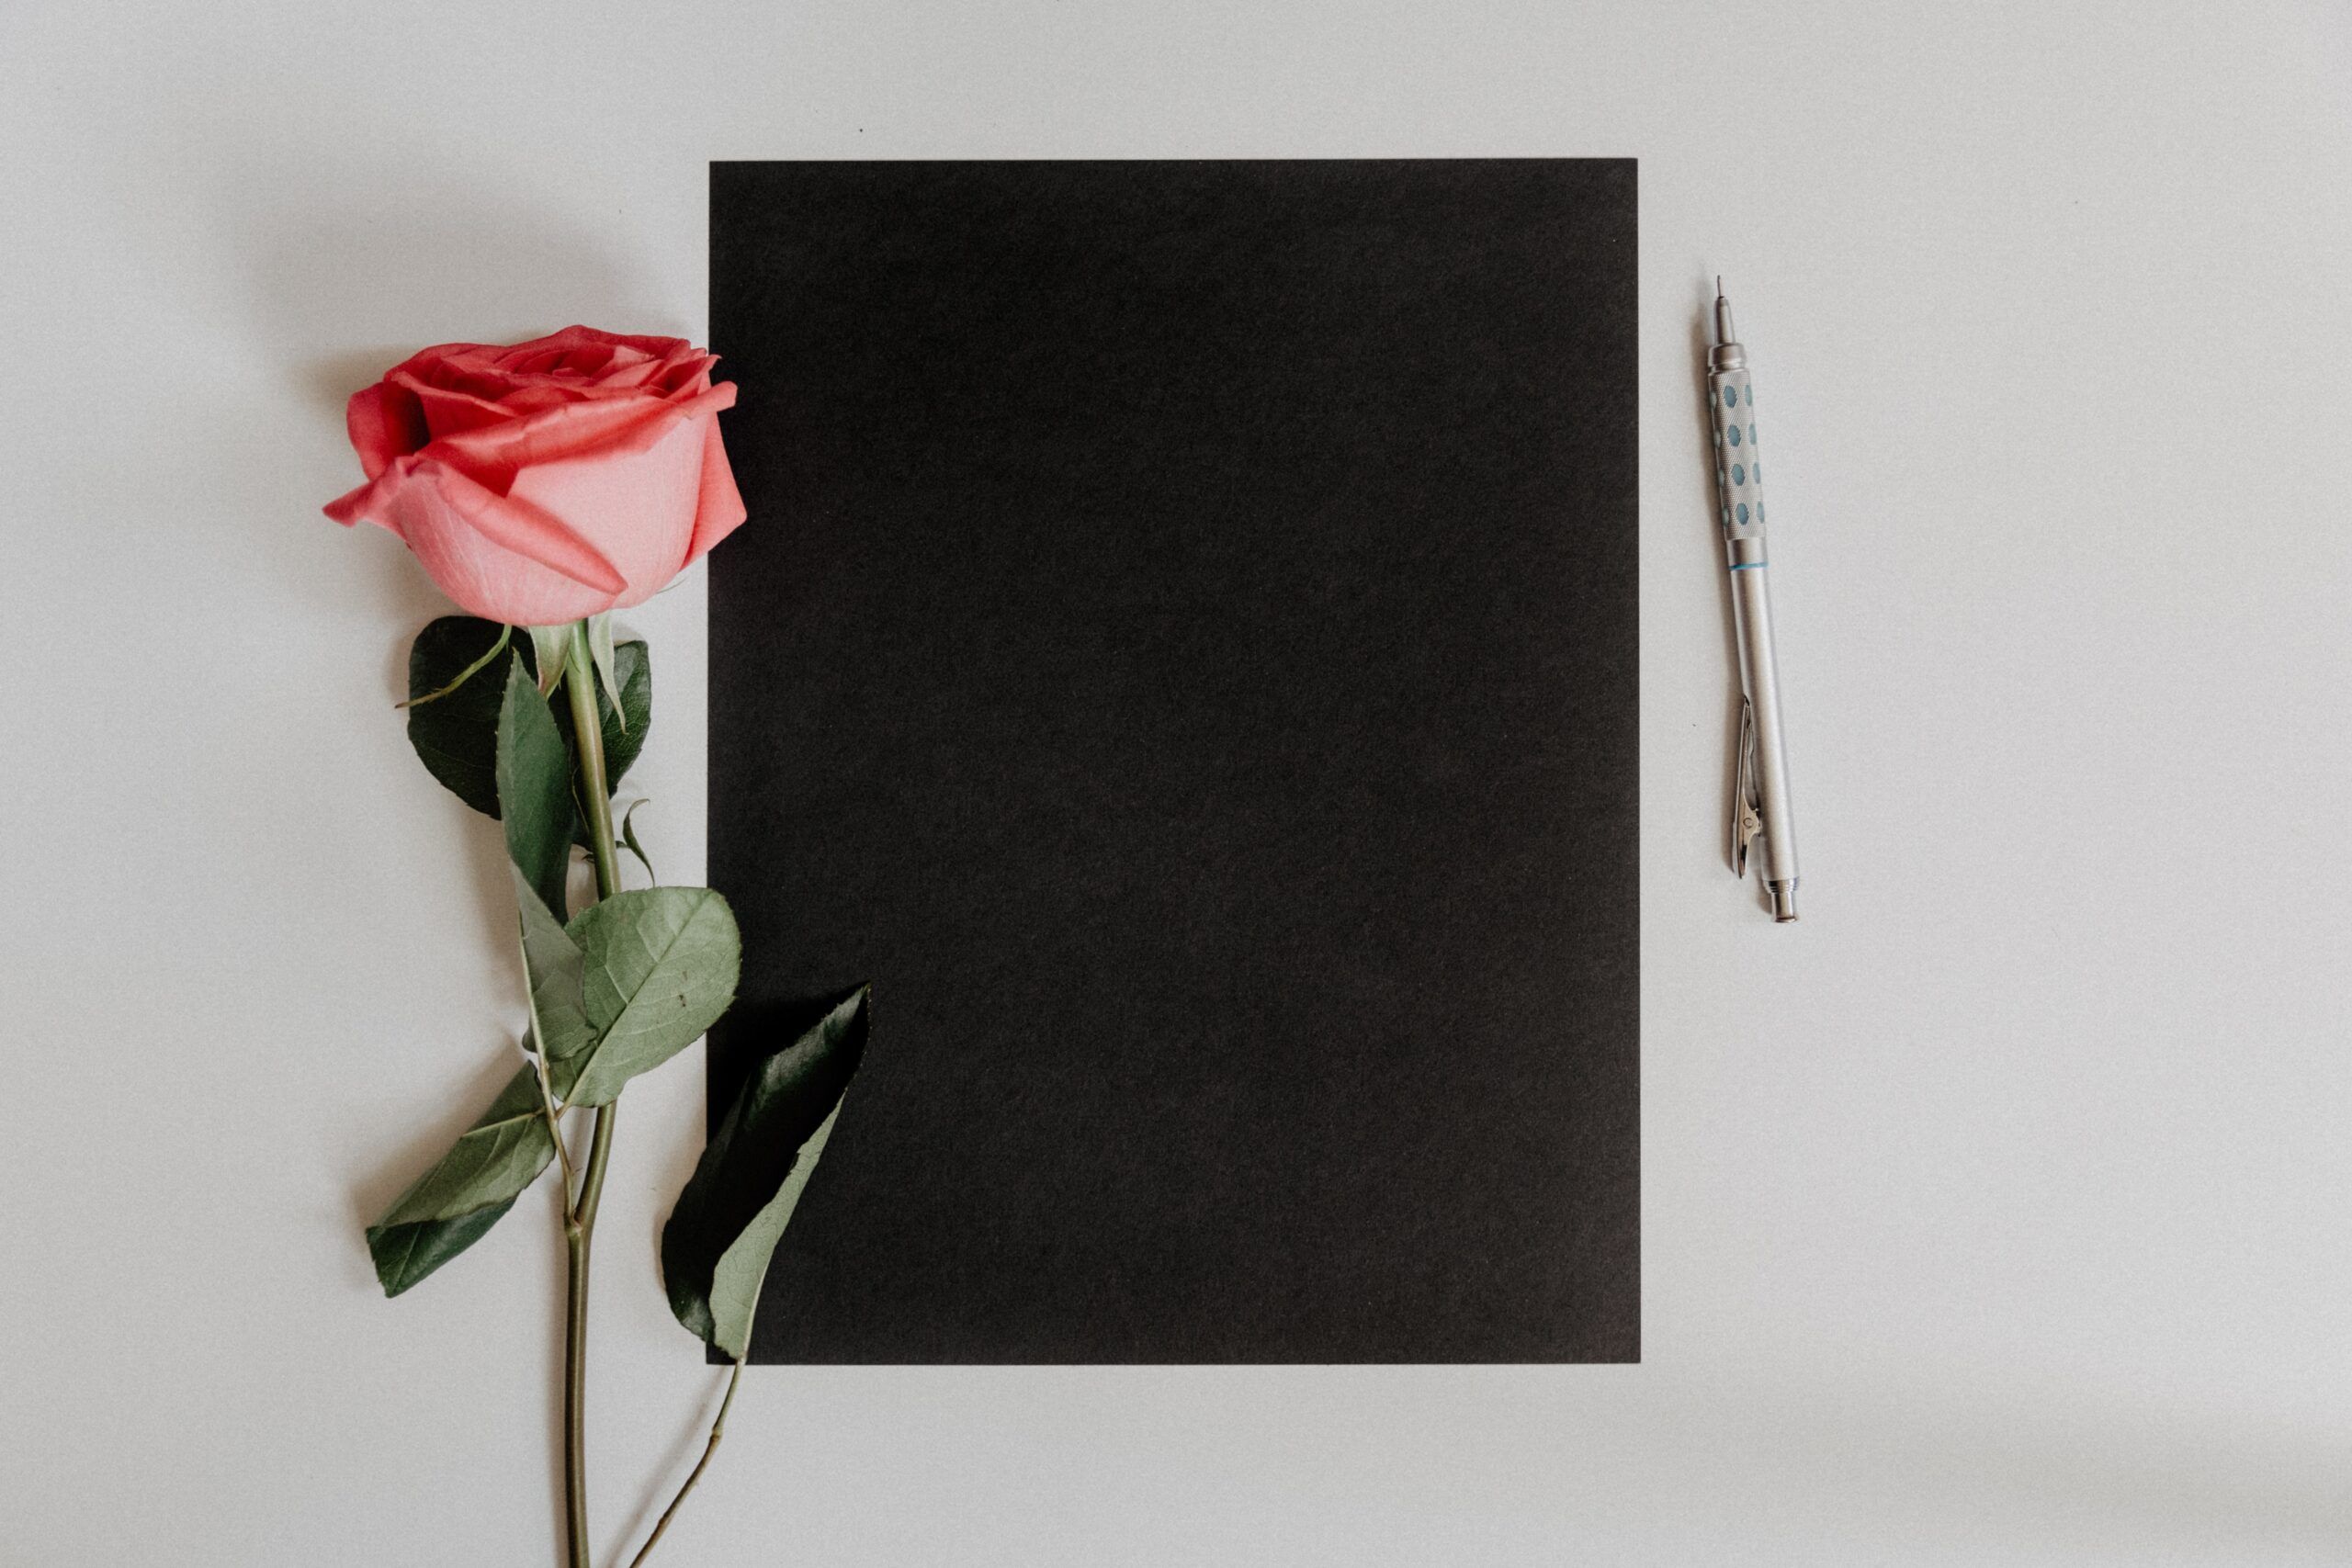 A pink rose is lying by the side of a journal with a black cover. A silver colored pen is also seen.